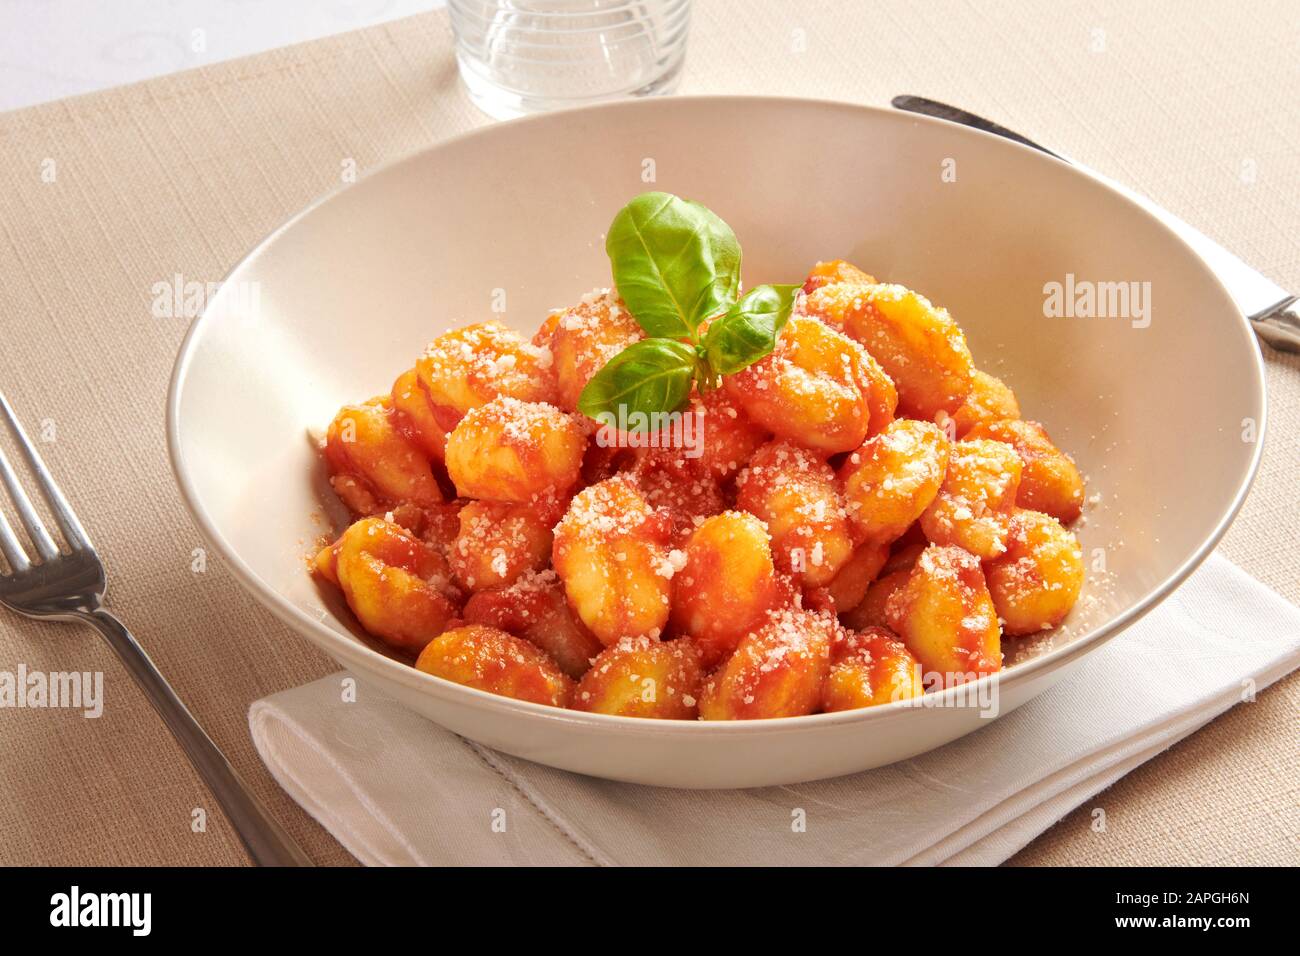 Serving of Italian gnocchi pasta in a bowl with pomodoro sauce and fresh basil on a folded napkin at table, a traditional regional Italian dish Stock Photo